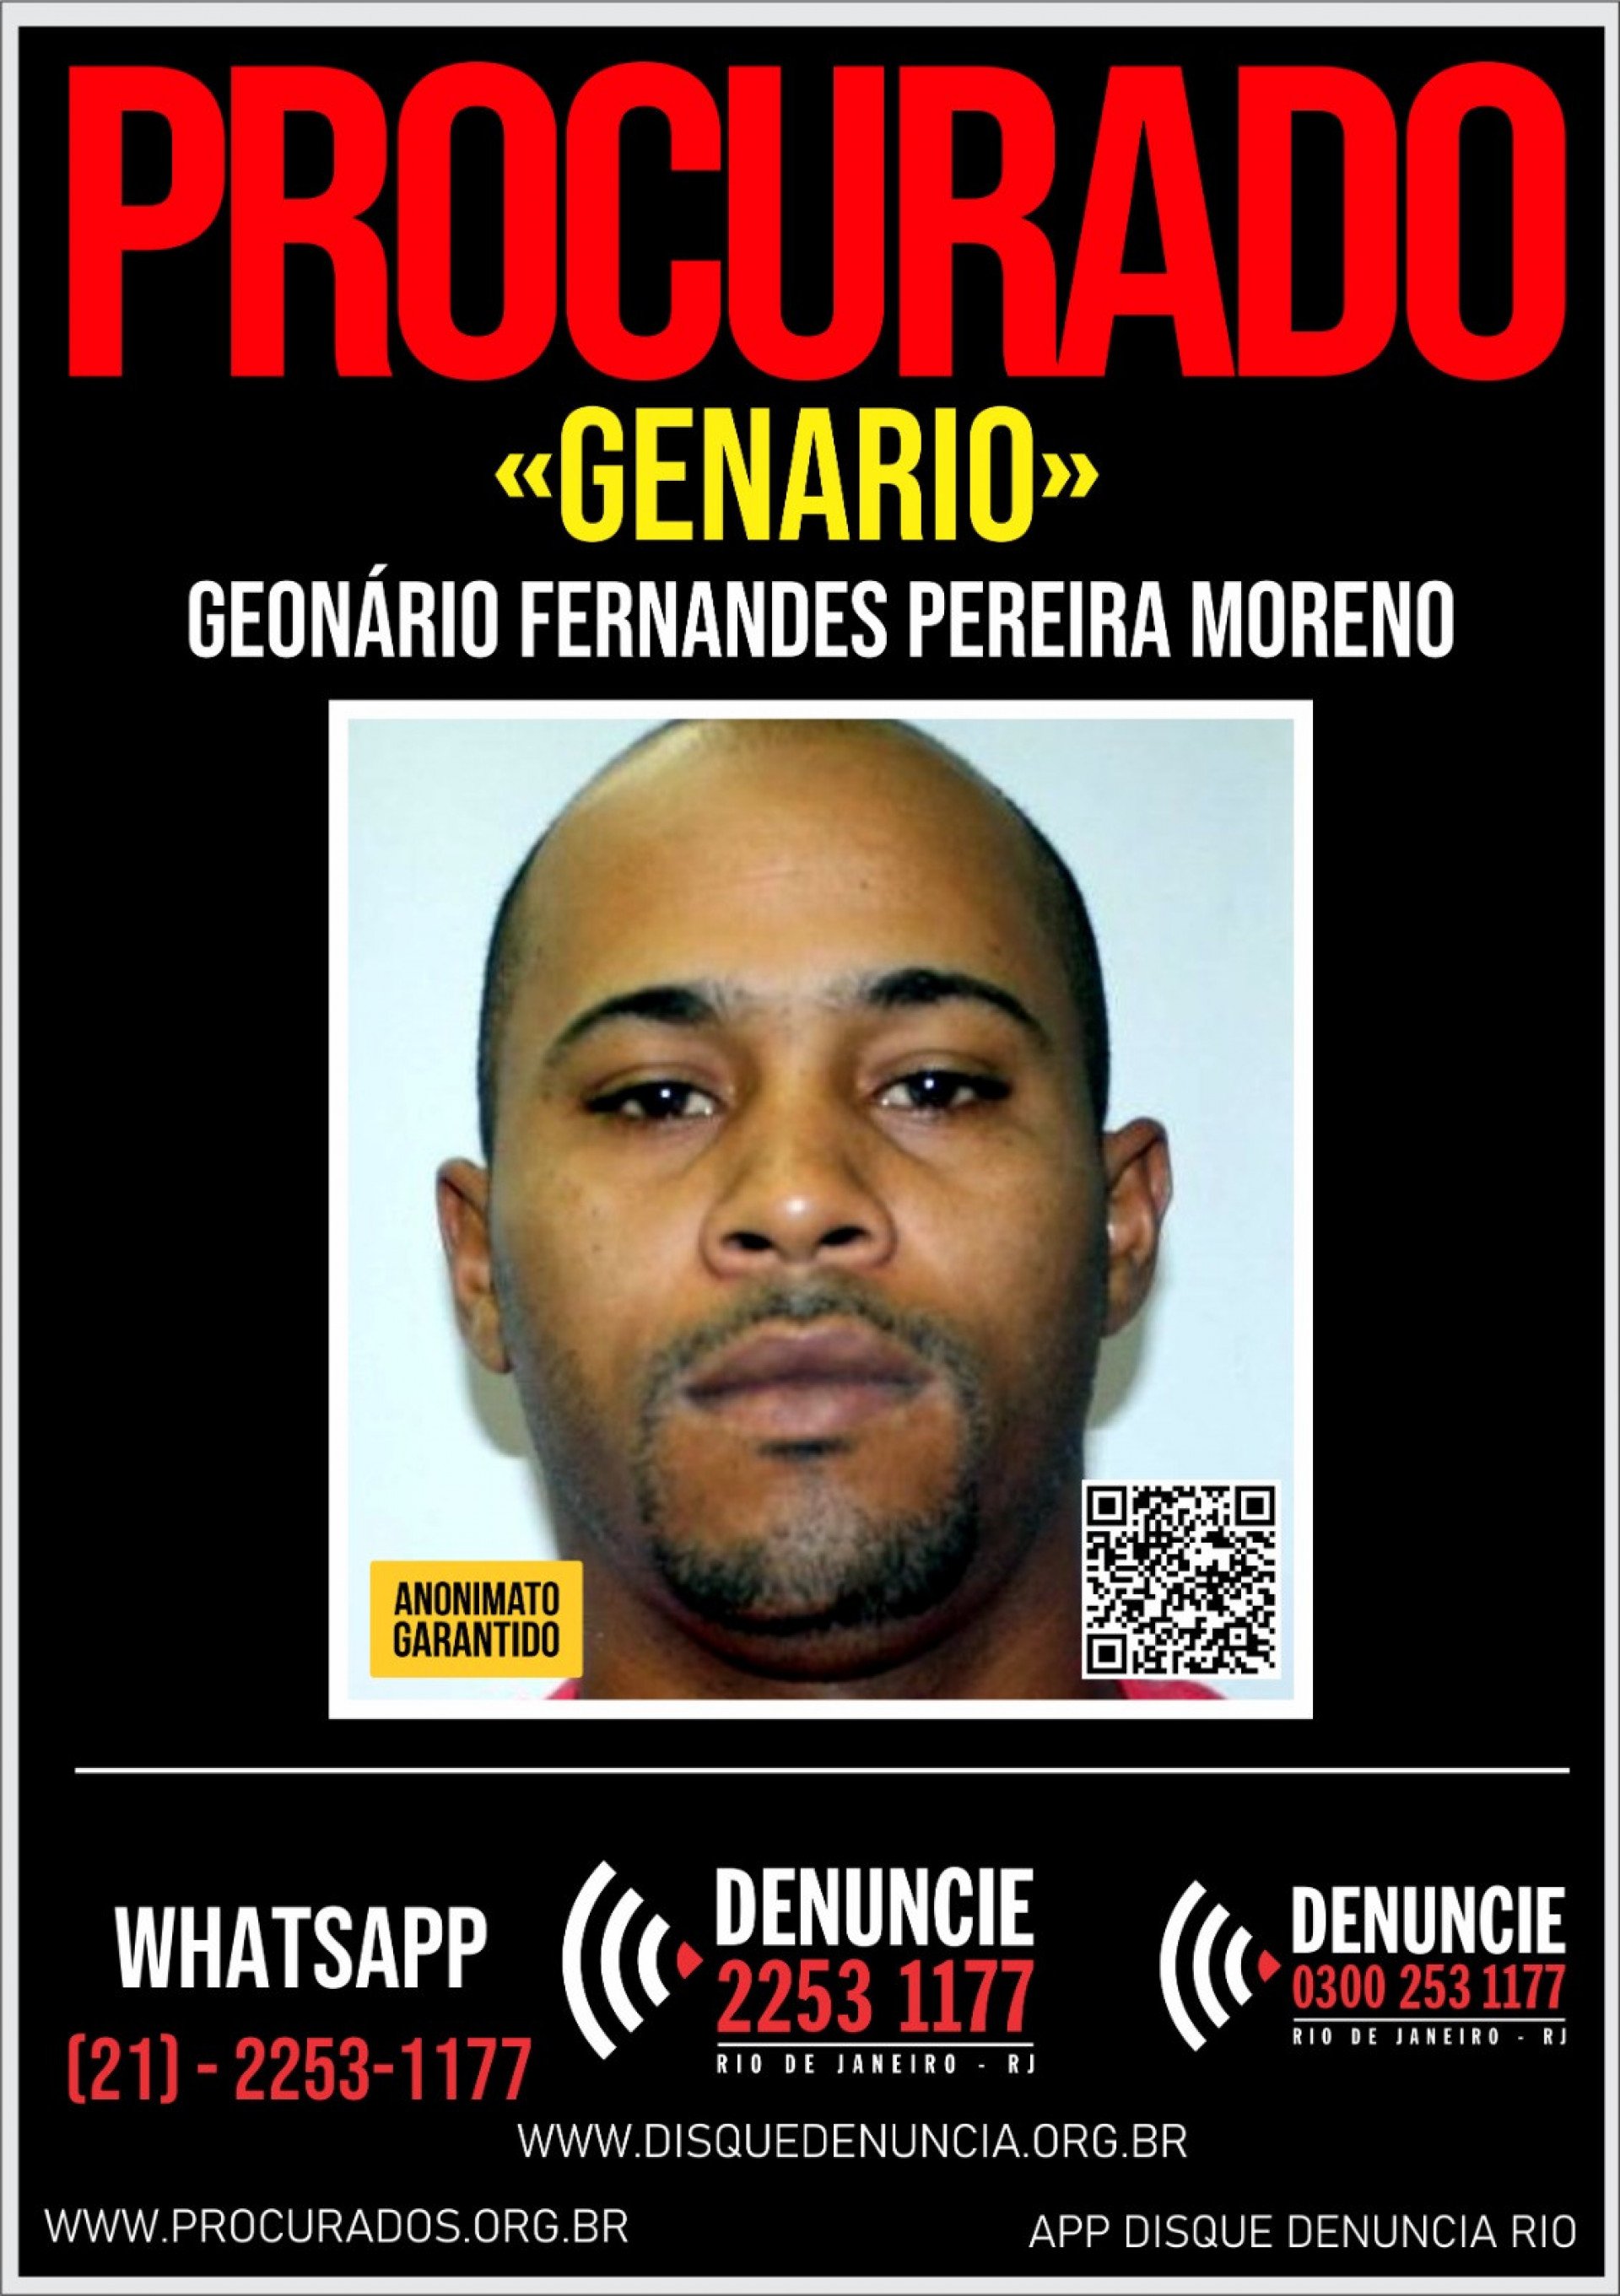 There are arrest warrants against Genario for simple and aggravated homicide, criminal organization and robbery - Disclosure/Disque Denúncia